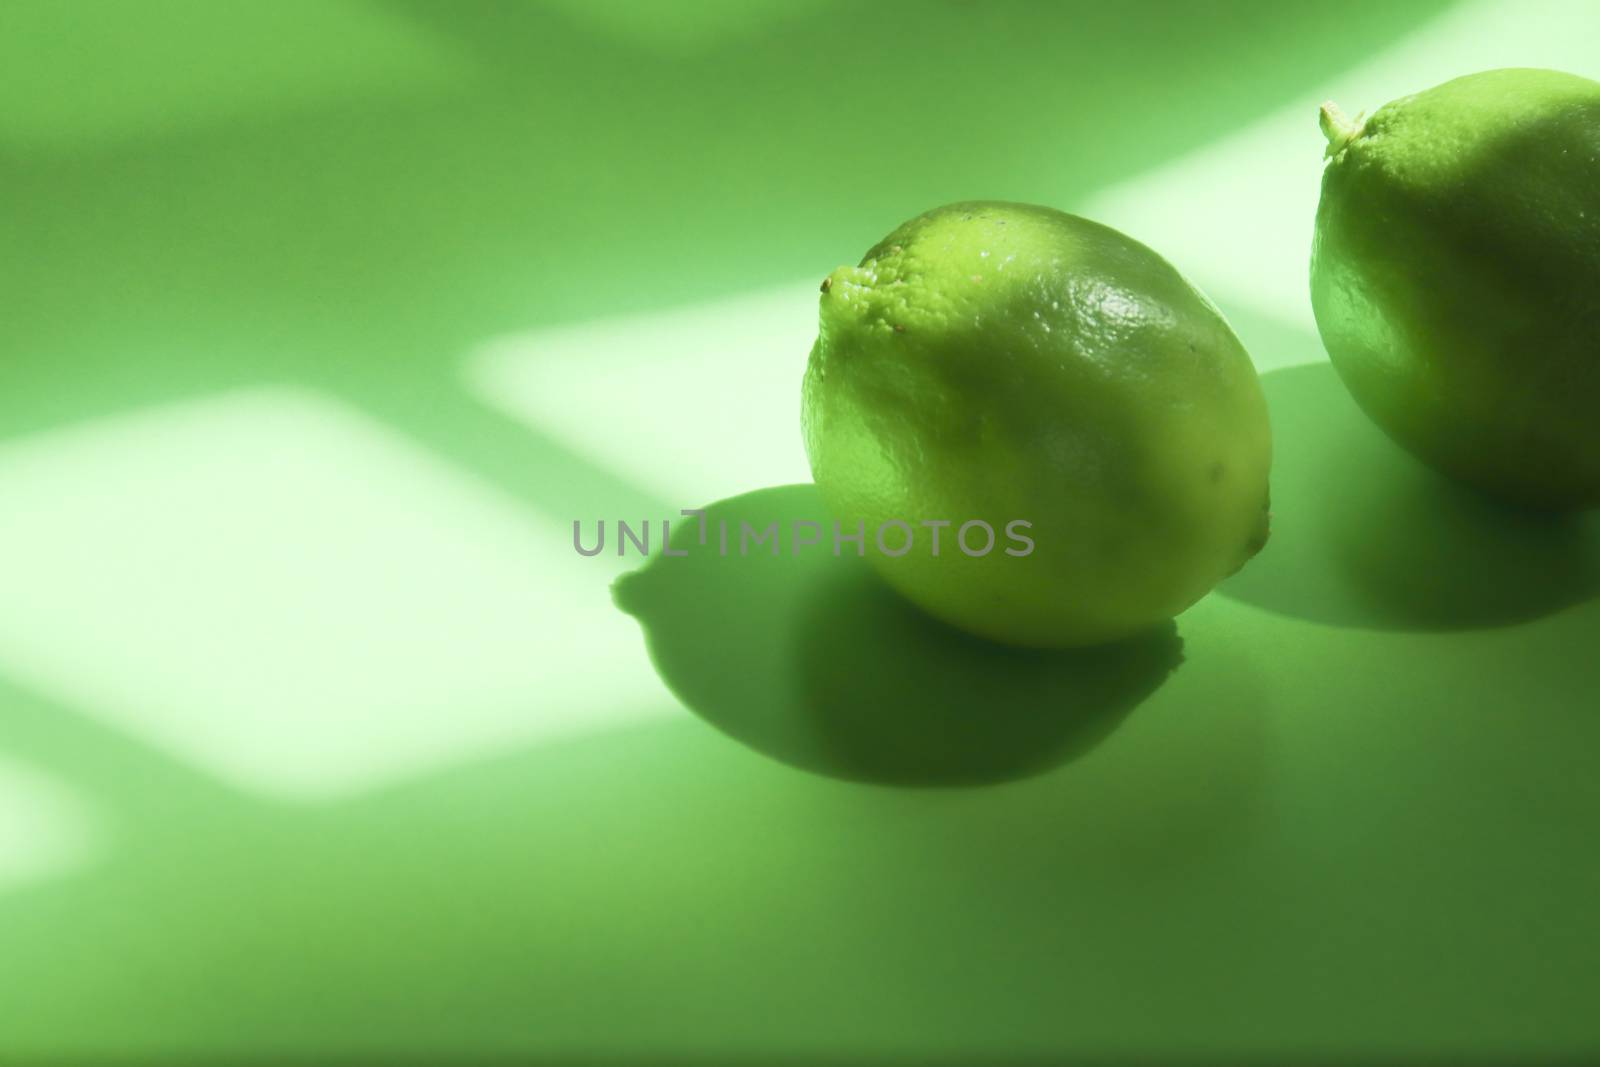 When life throws you lemons, conceptual still life by Sonnet15